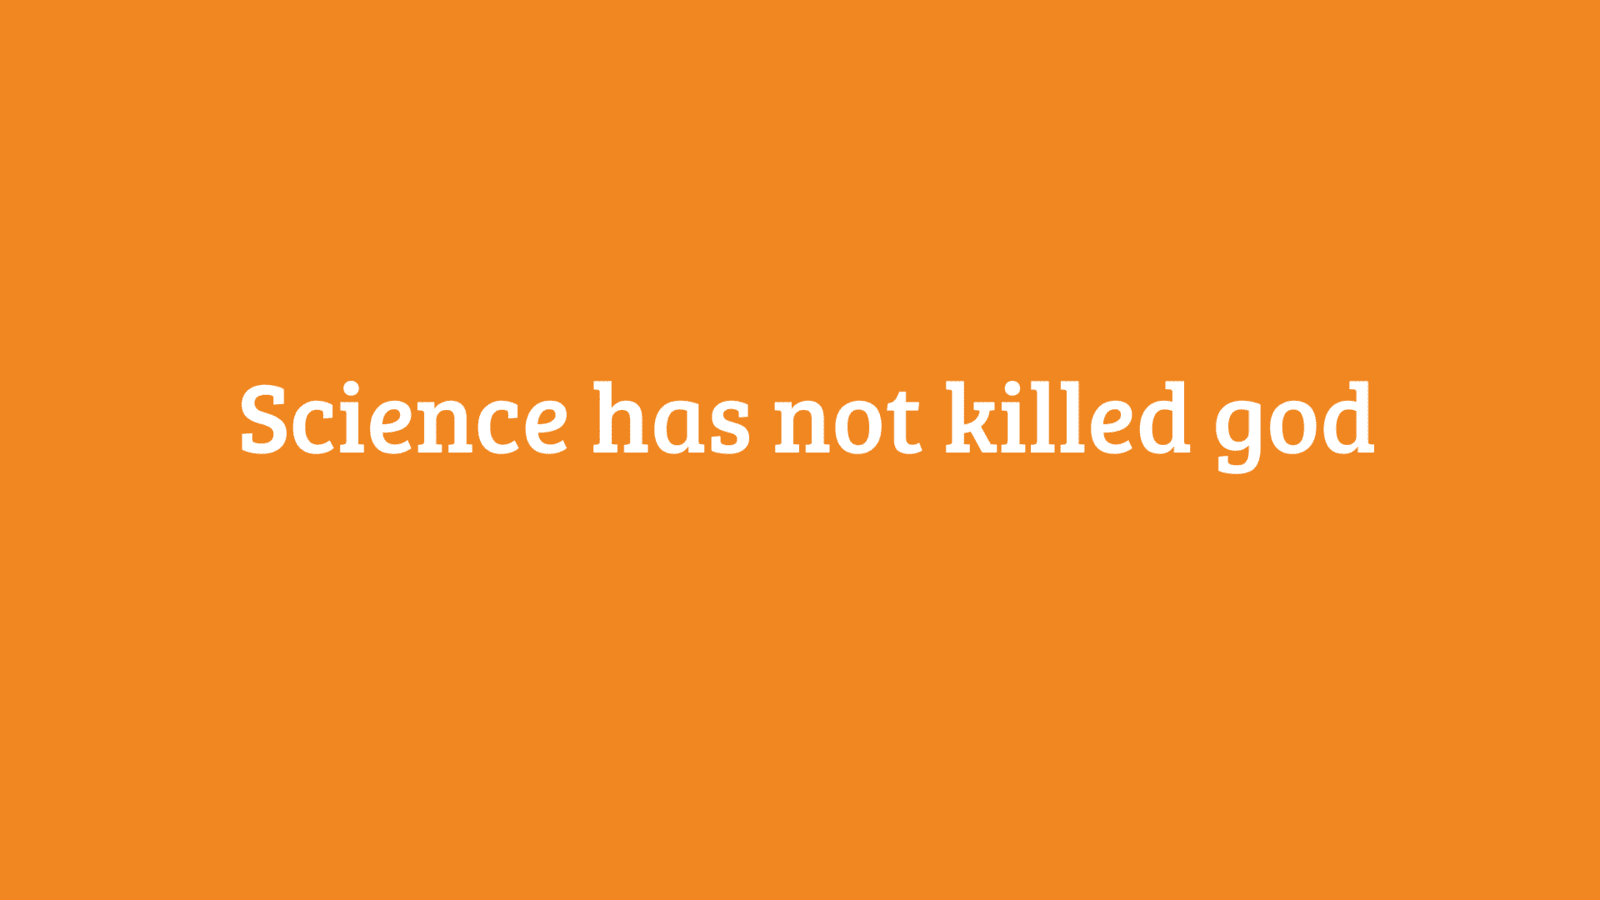  Science has not killed god - Grounding belief in philosophy, logic and experience 